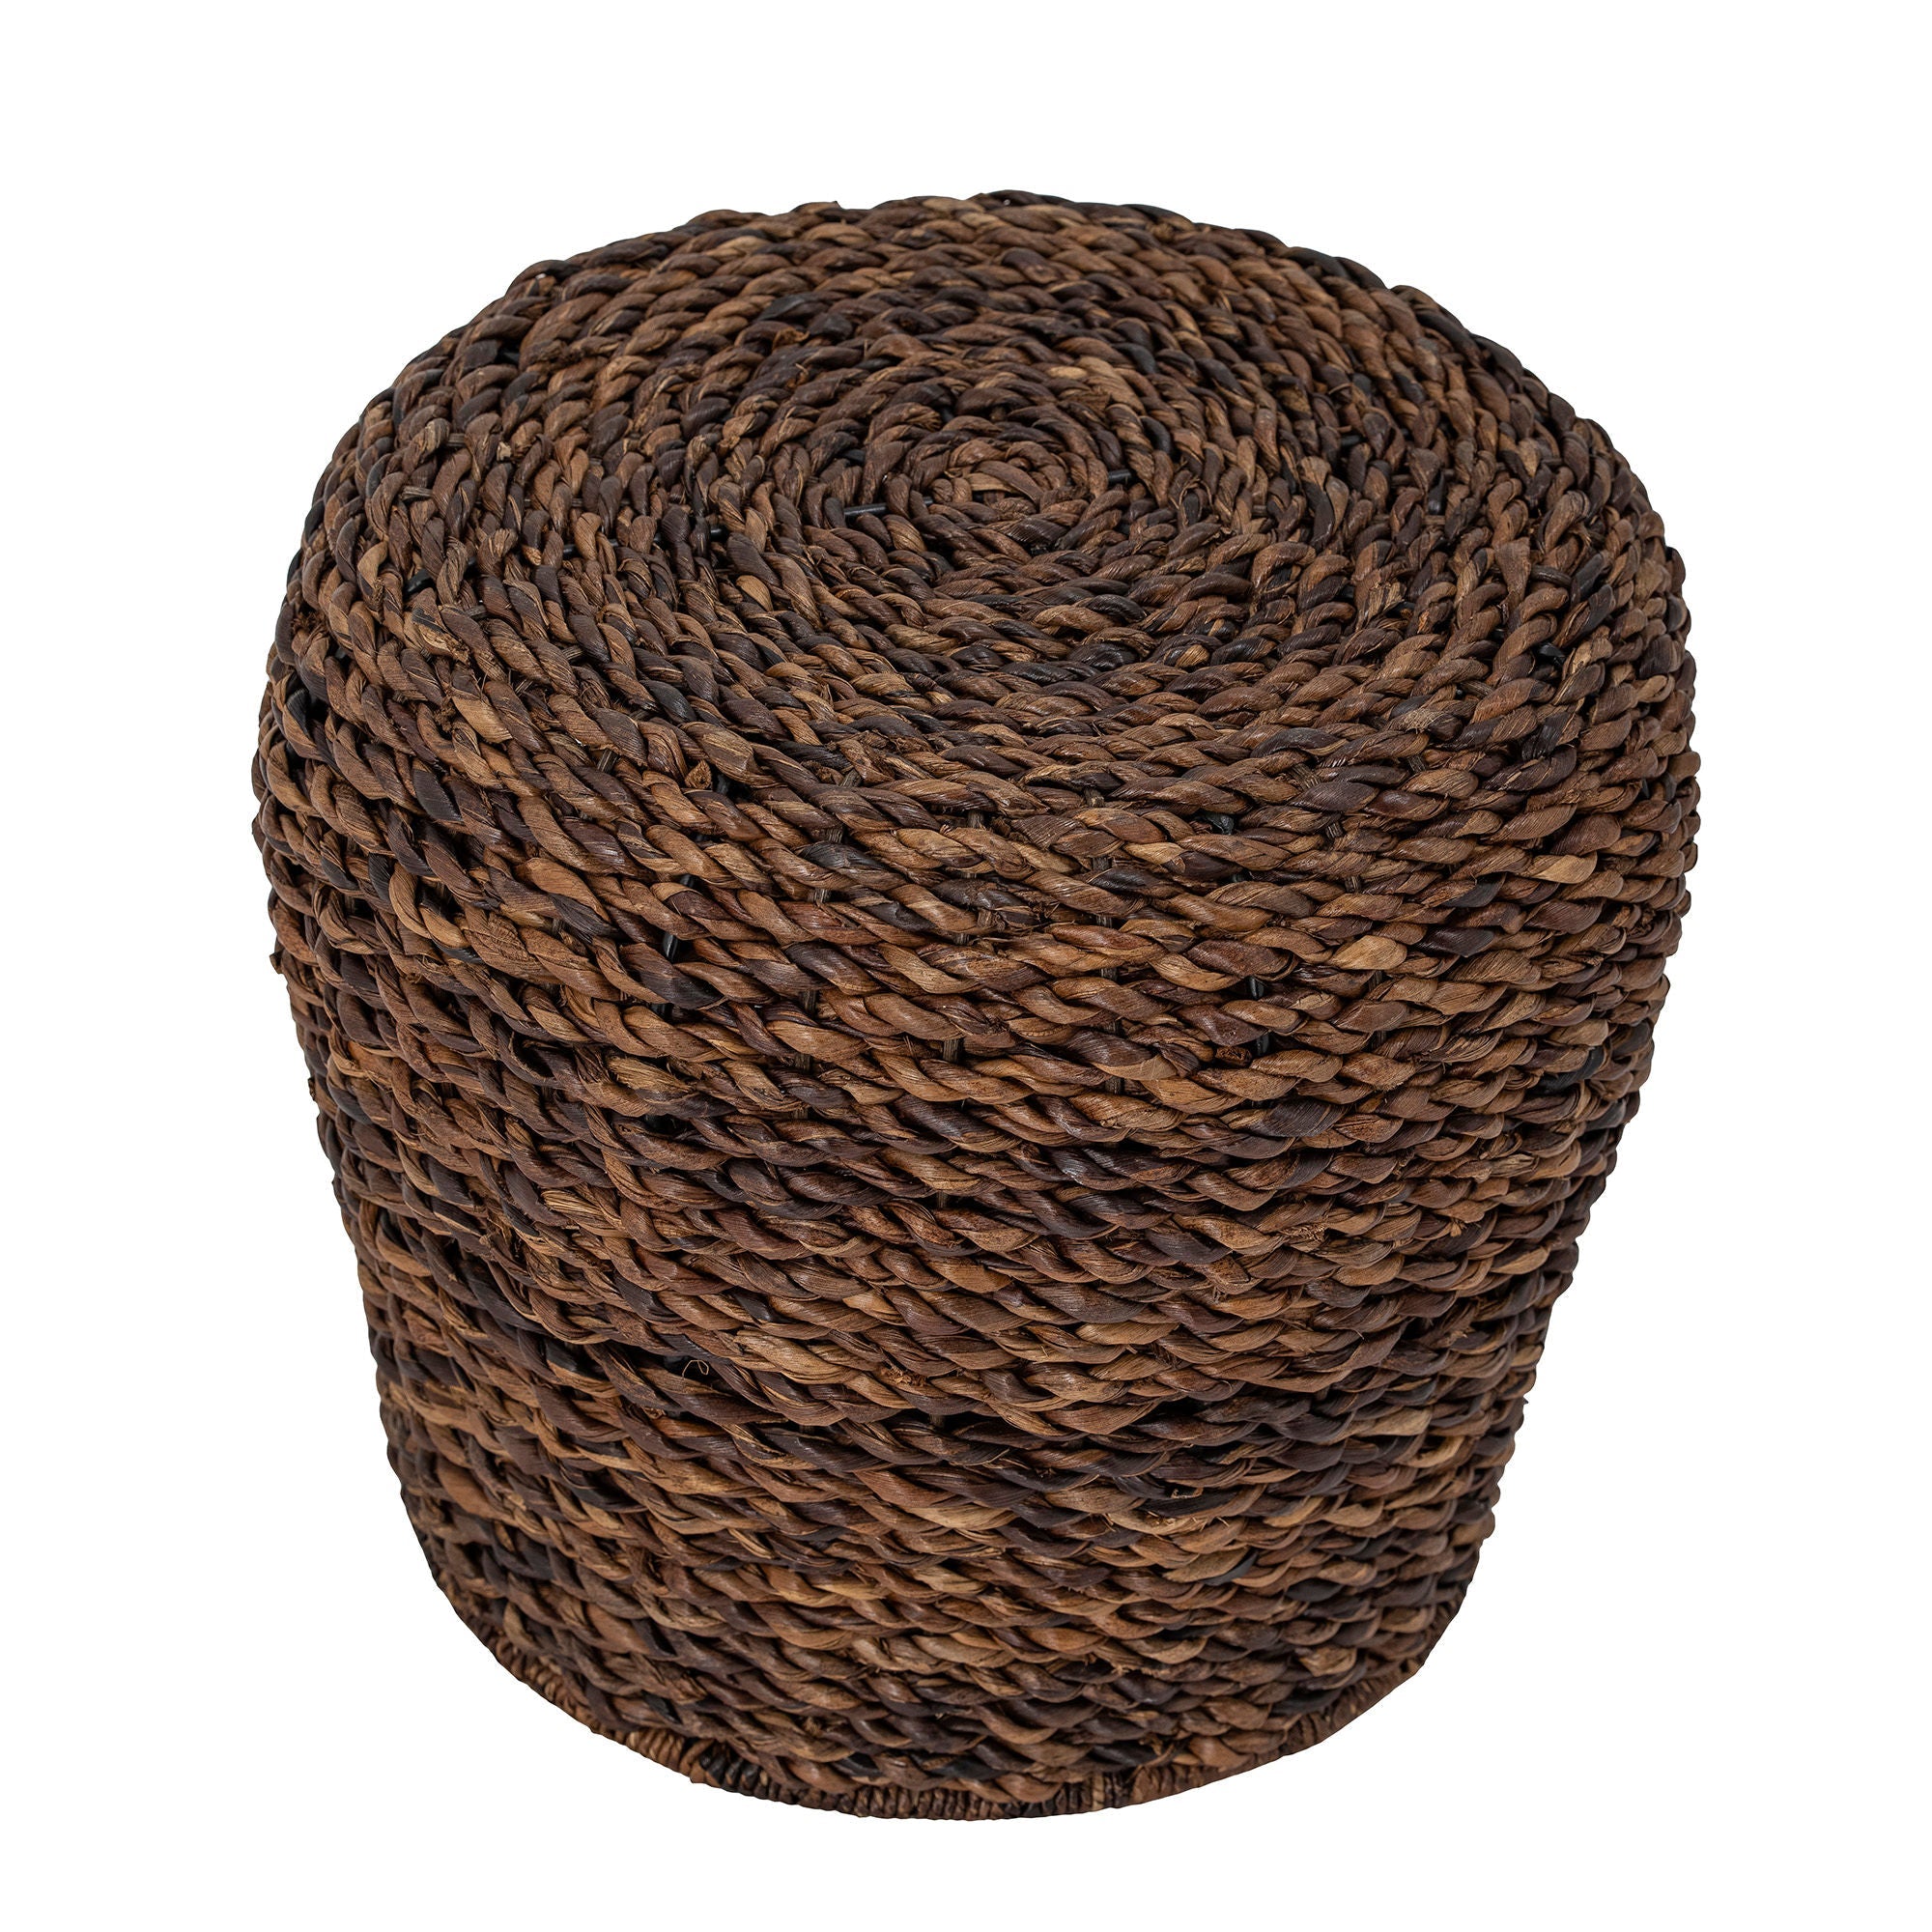 Creative Collection Tasse Stool, Brown, Abaca